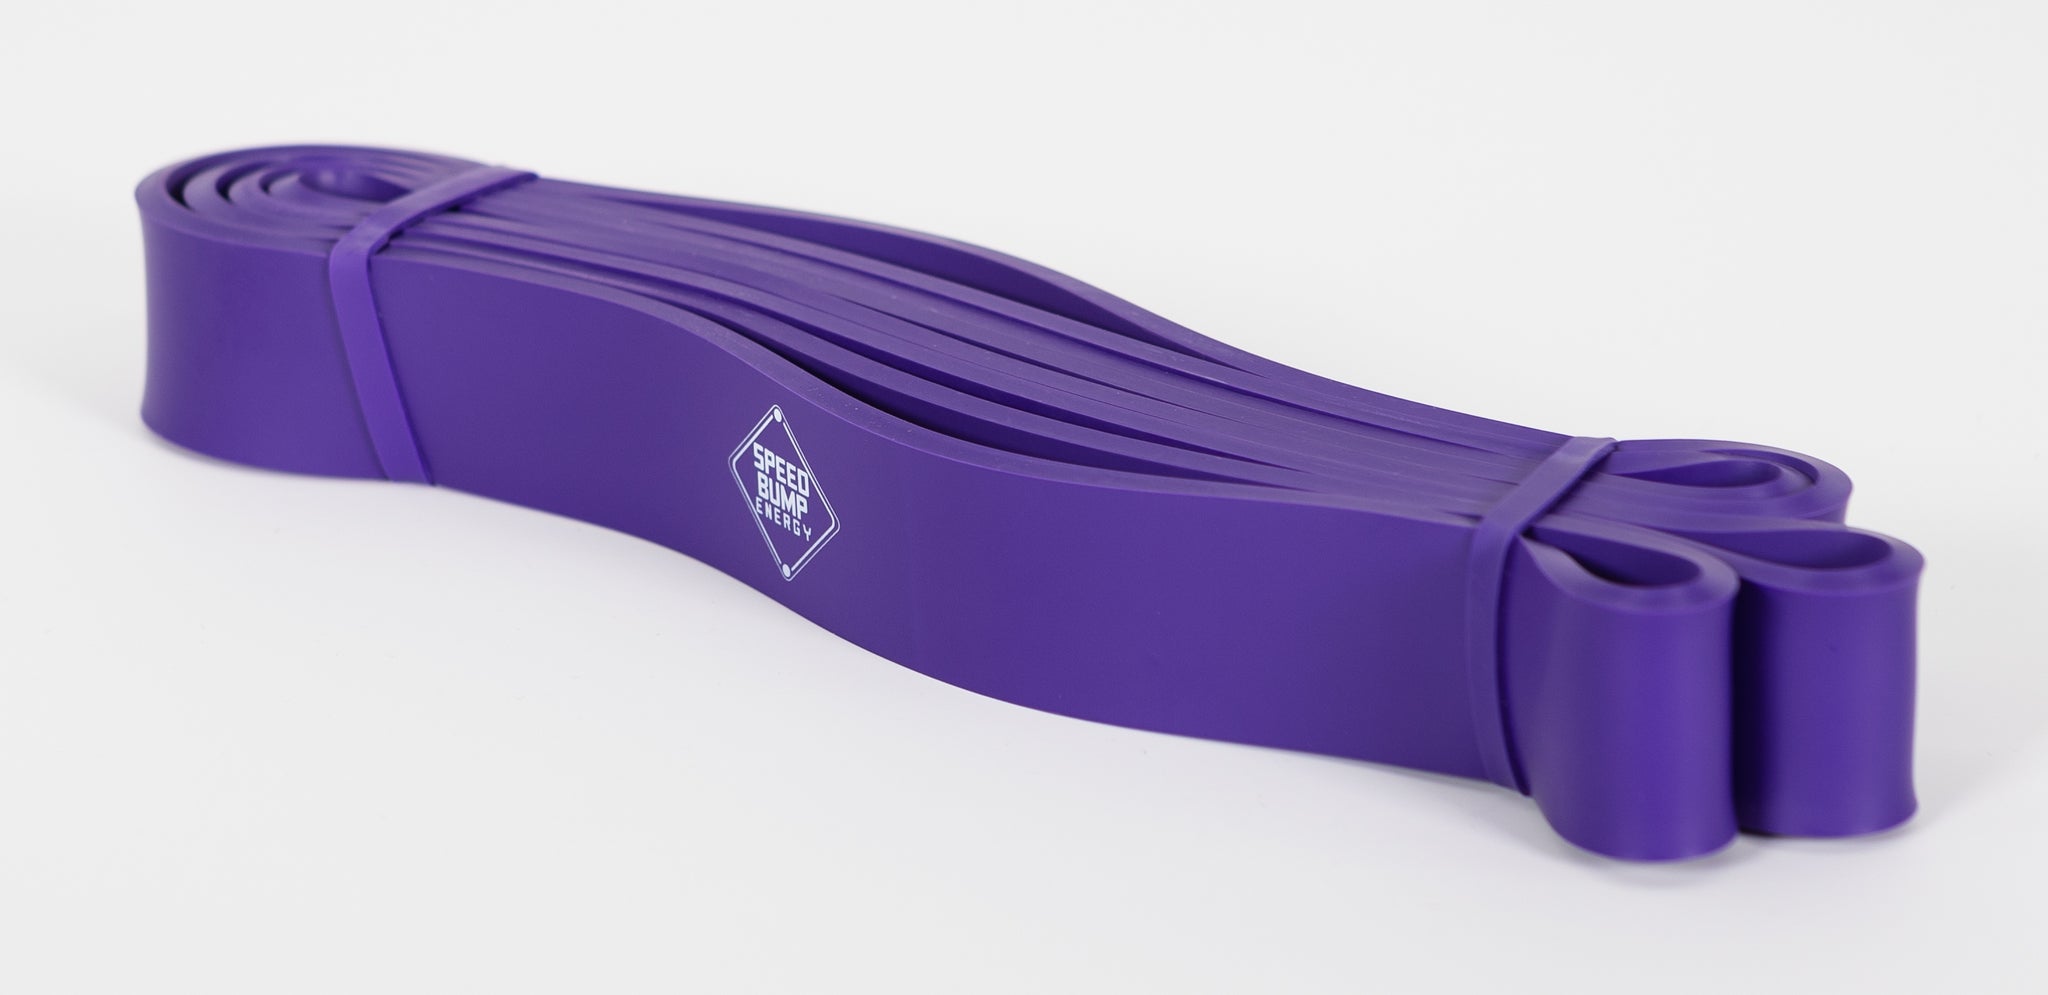 Purp Resistance Band 100% Latex for Tension Strength Training (45 lbs - 100 lb)